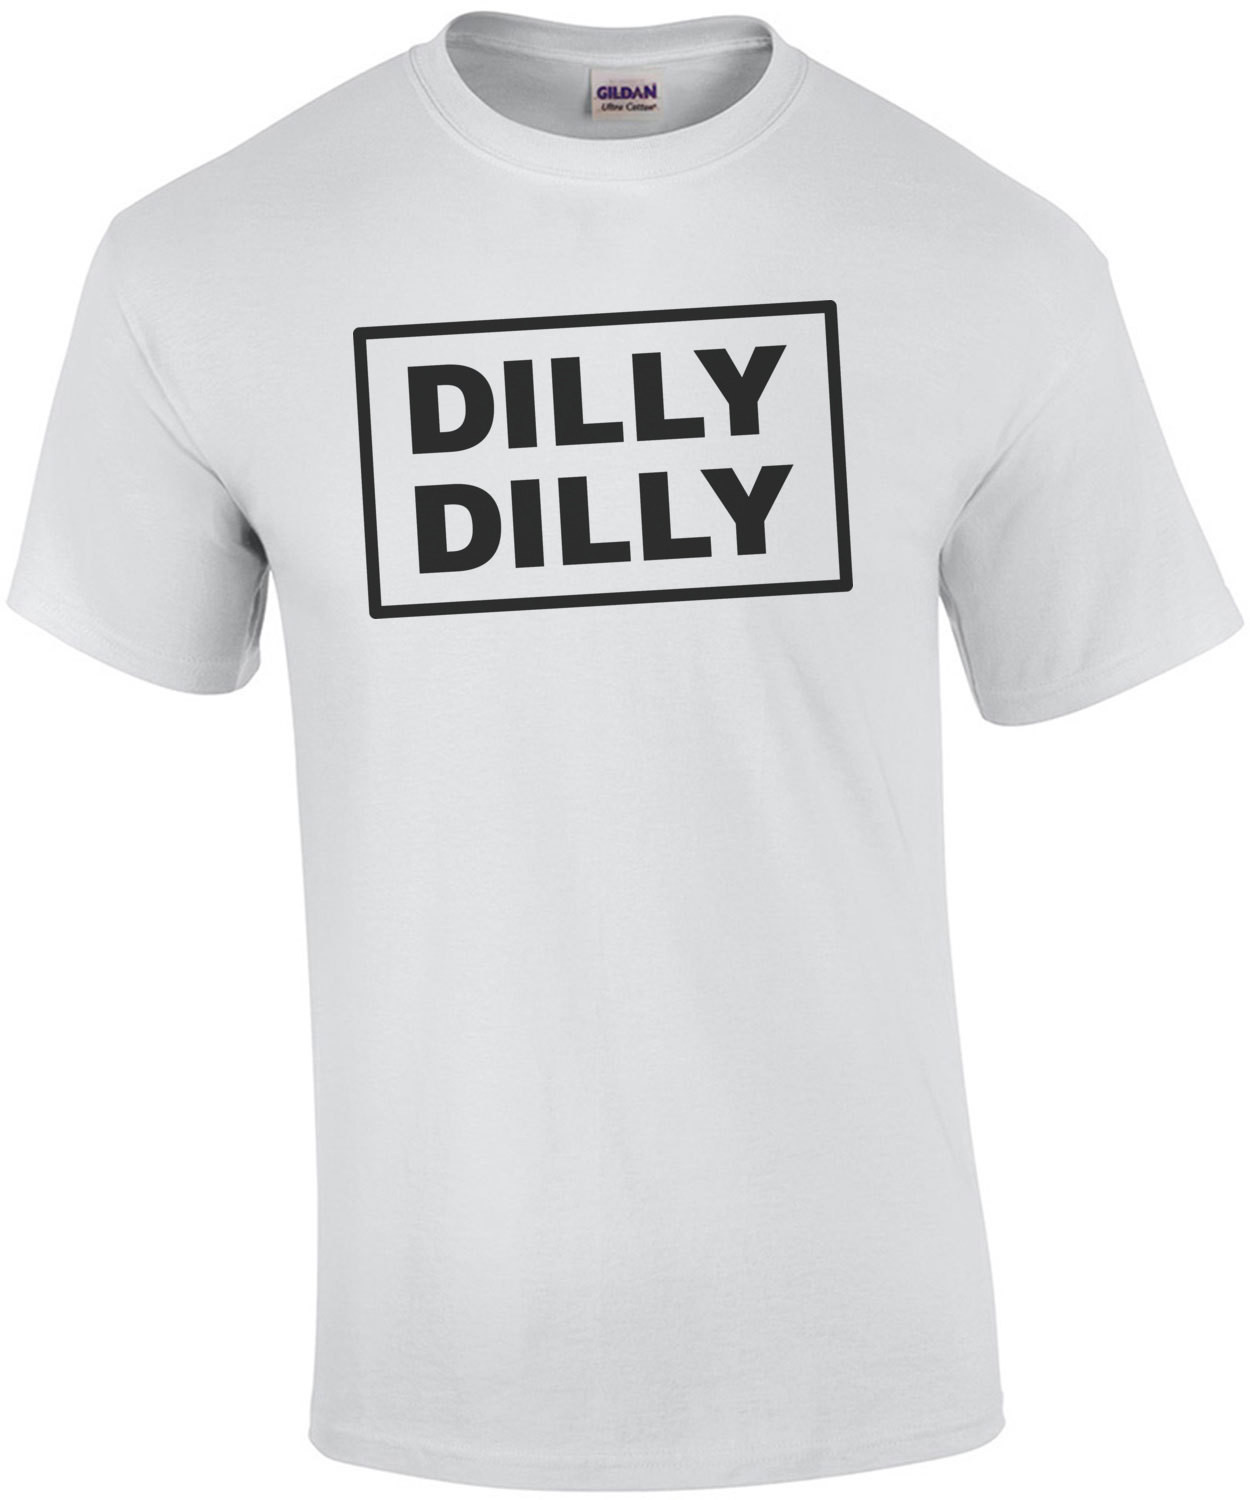 Dilly Dilly Funny Budweiser Shirt